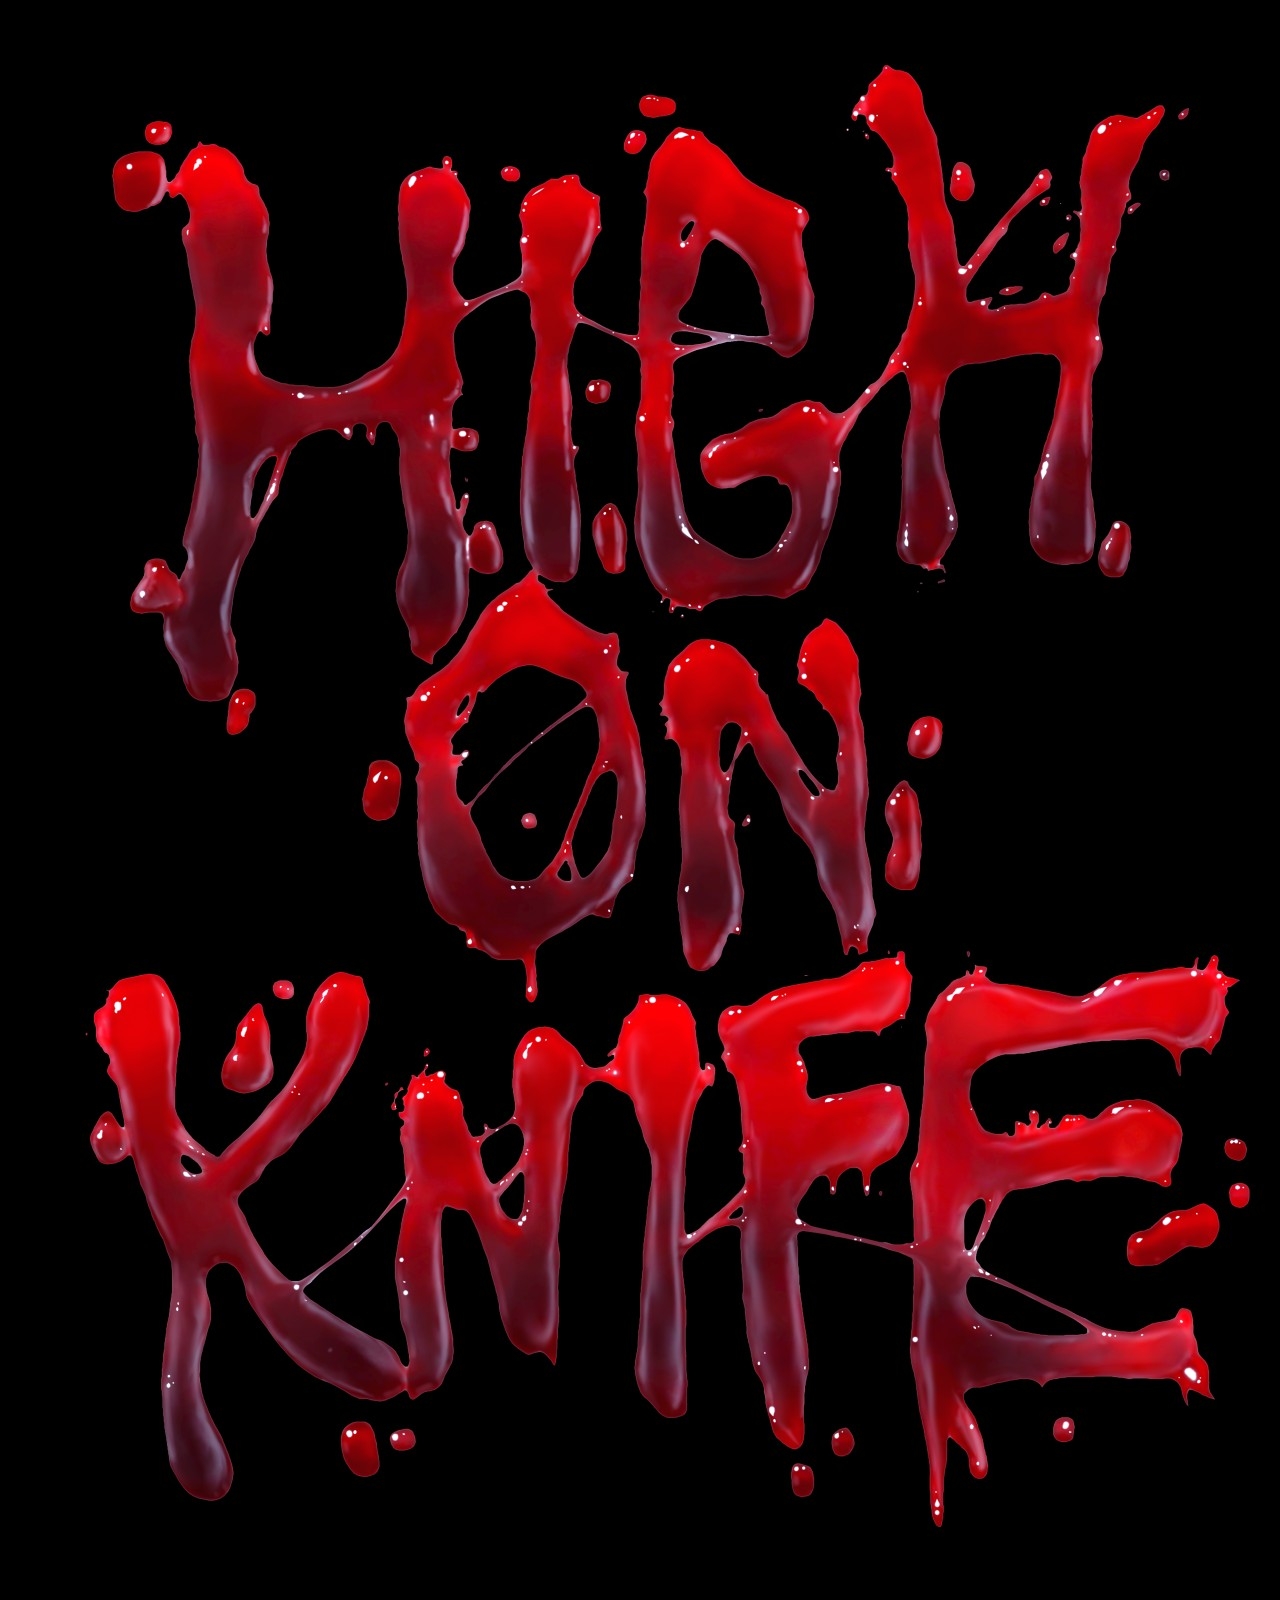 High on Life DLC, 'High on Knife', is Releasing Next Week